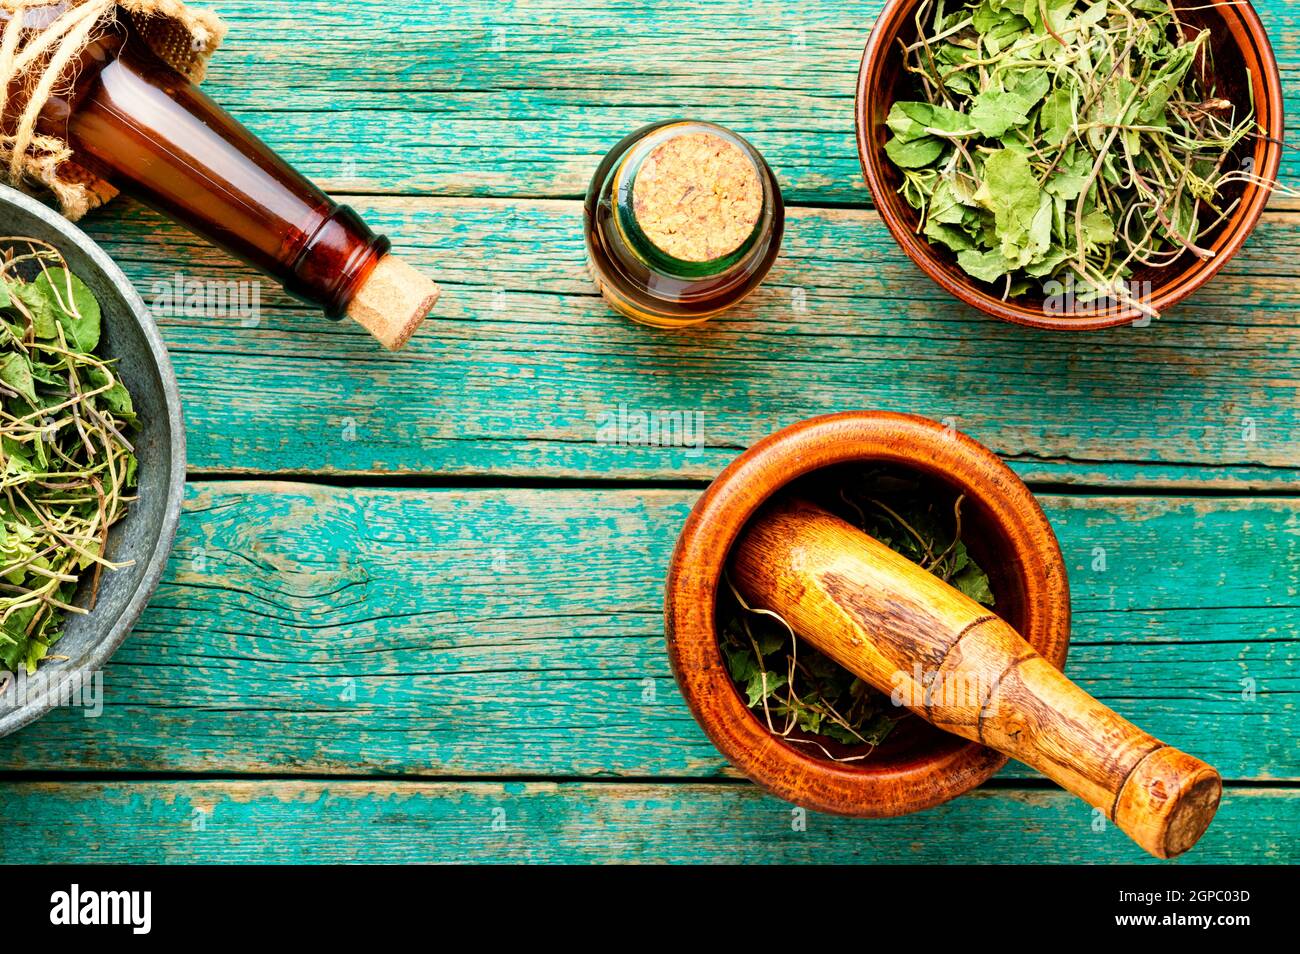 Mortar with a pestle with dried medicinal orthilia secunda.Medicinal herbs in herbal medicine. Stock Photo